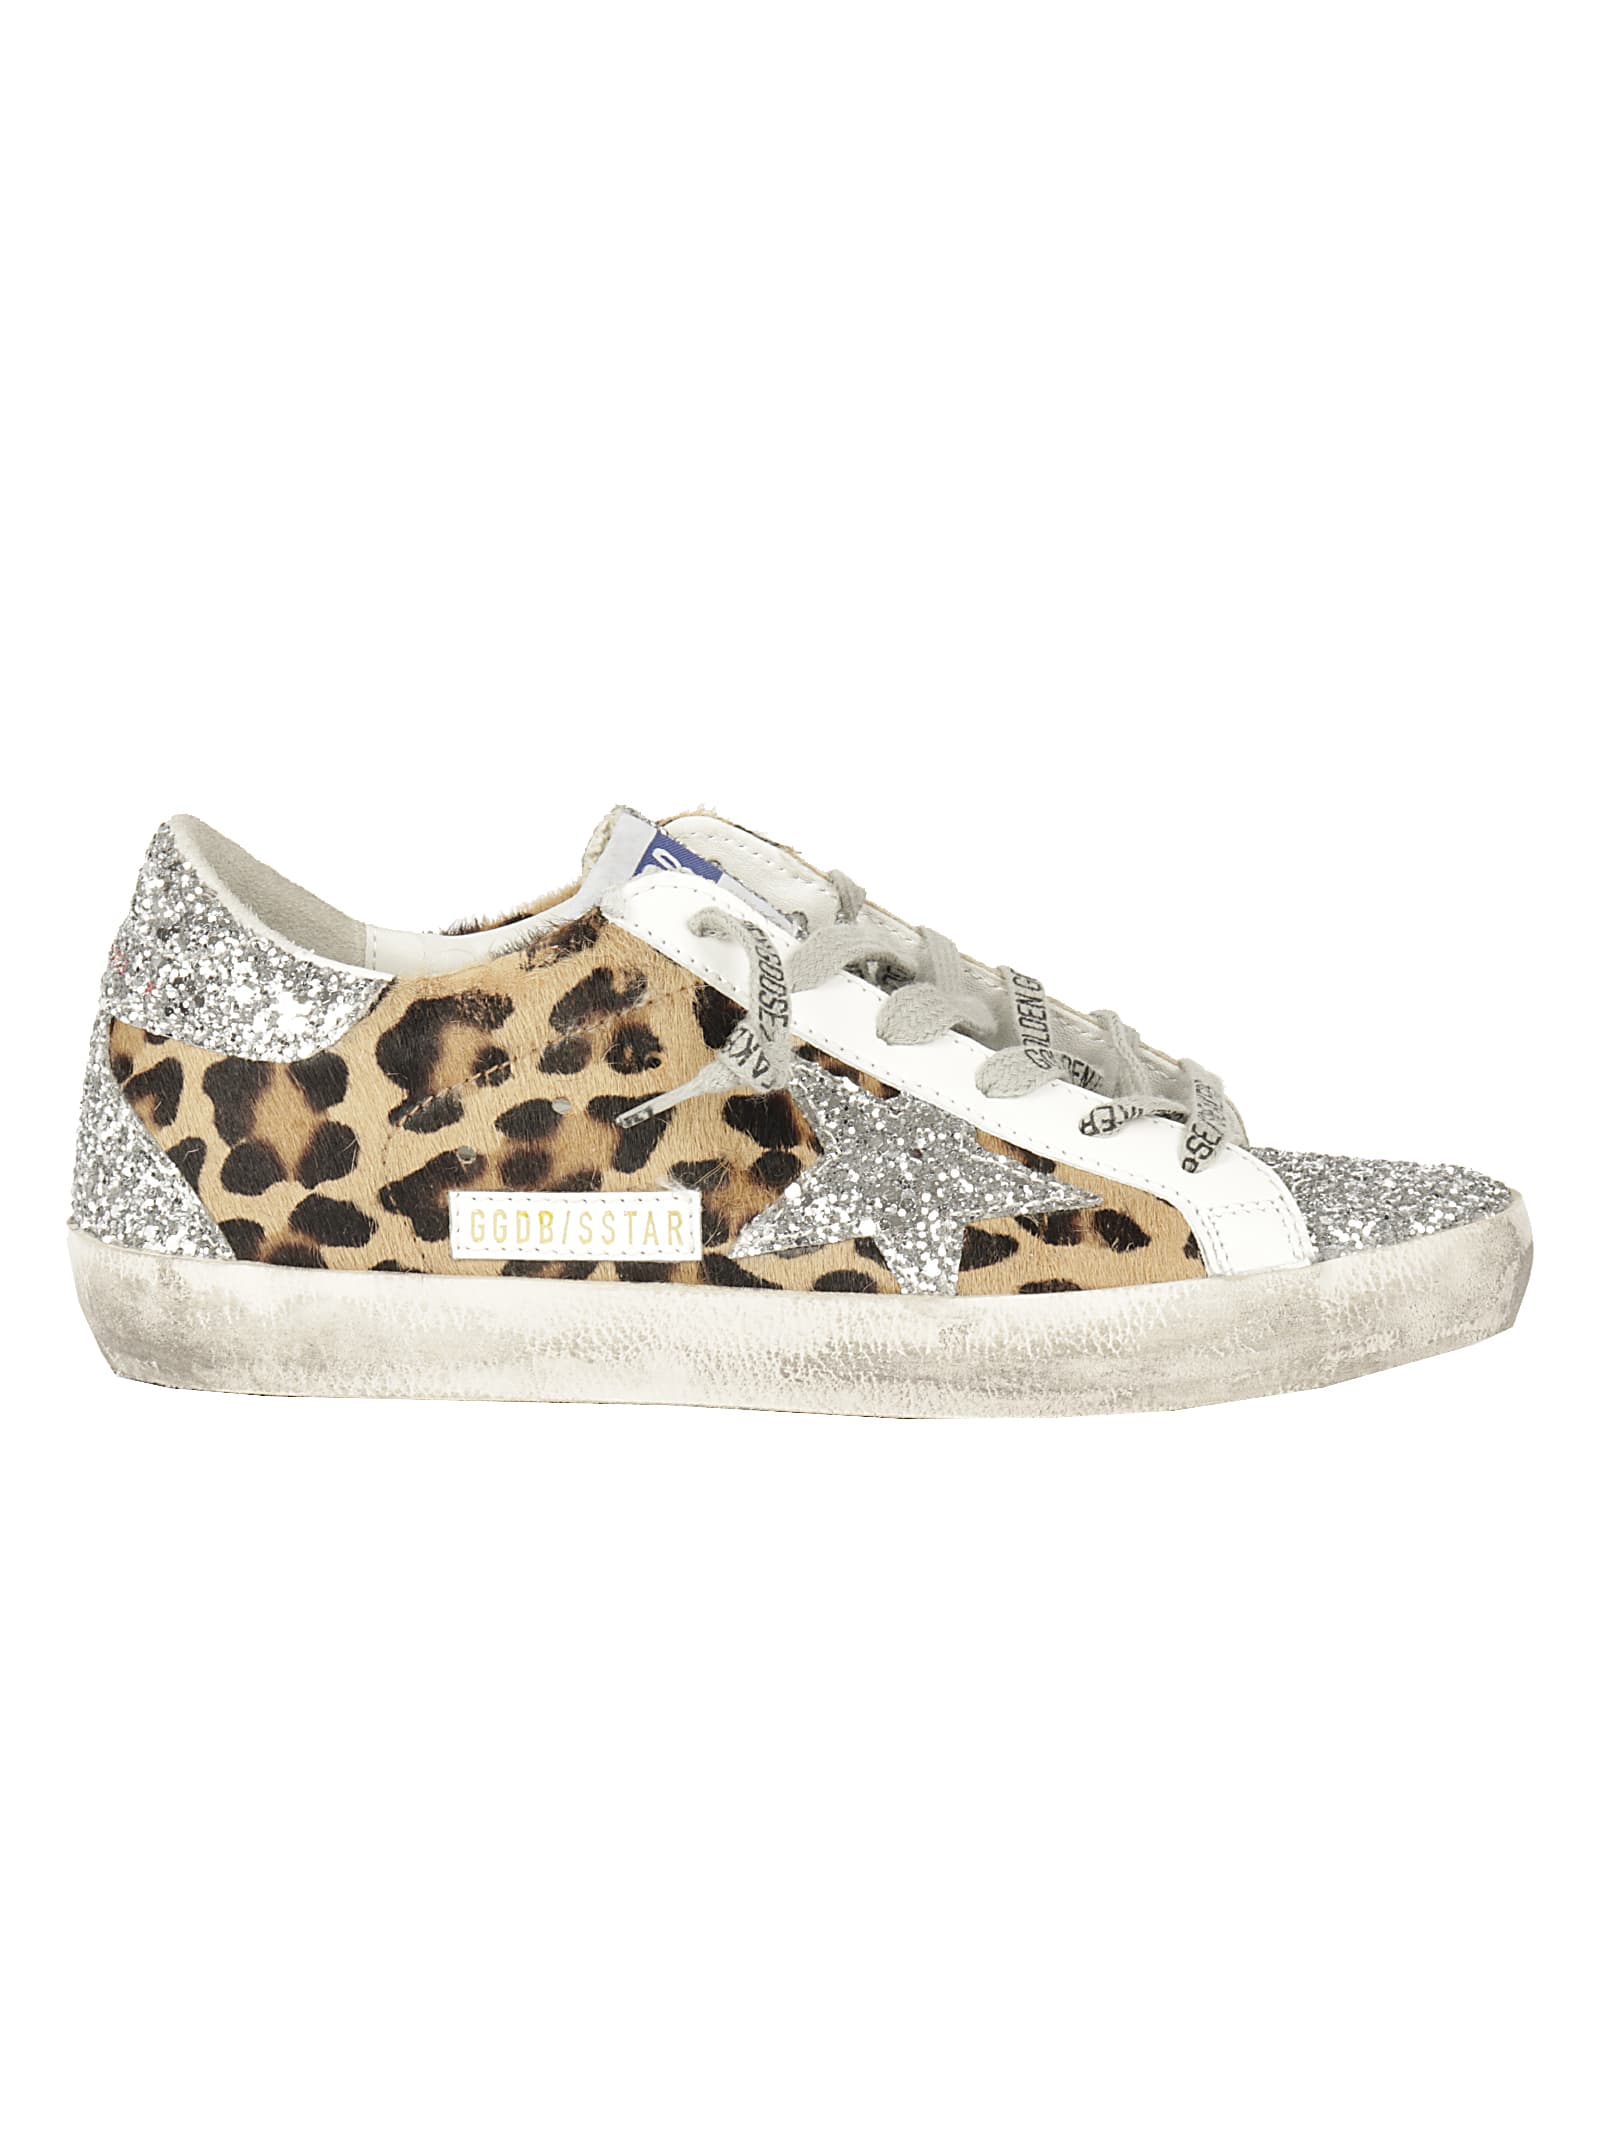 Buy Golden Goose Superstar Leopard Horsy Upper Glitter Star And Hee online, shop Golden Goose shoes with free shipping